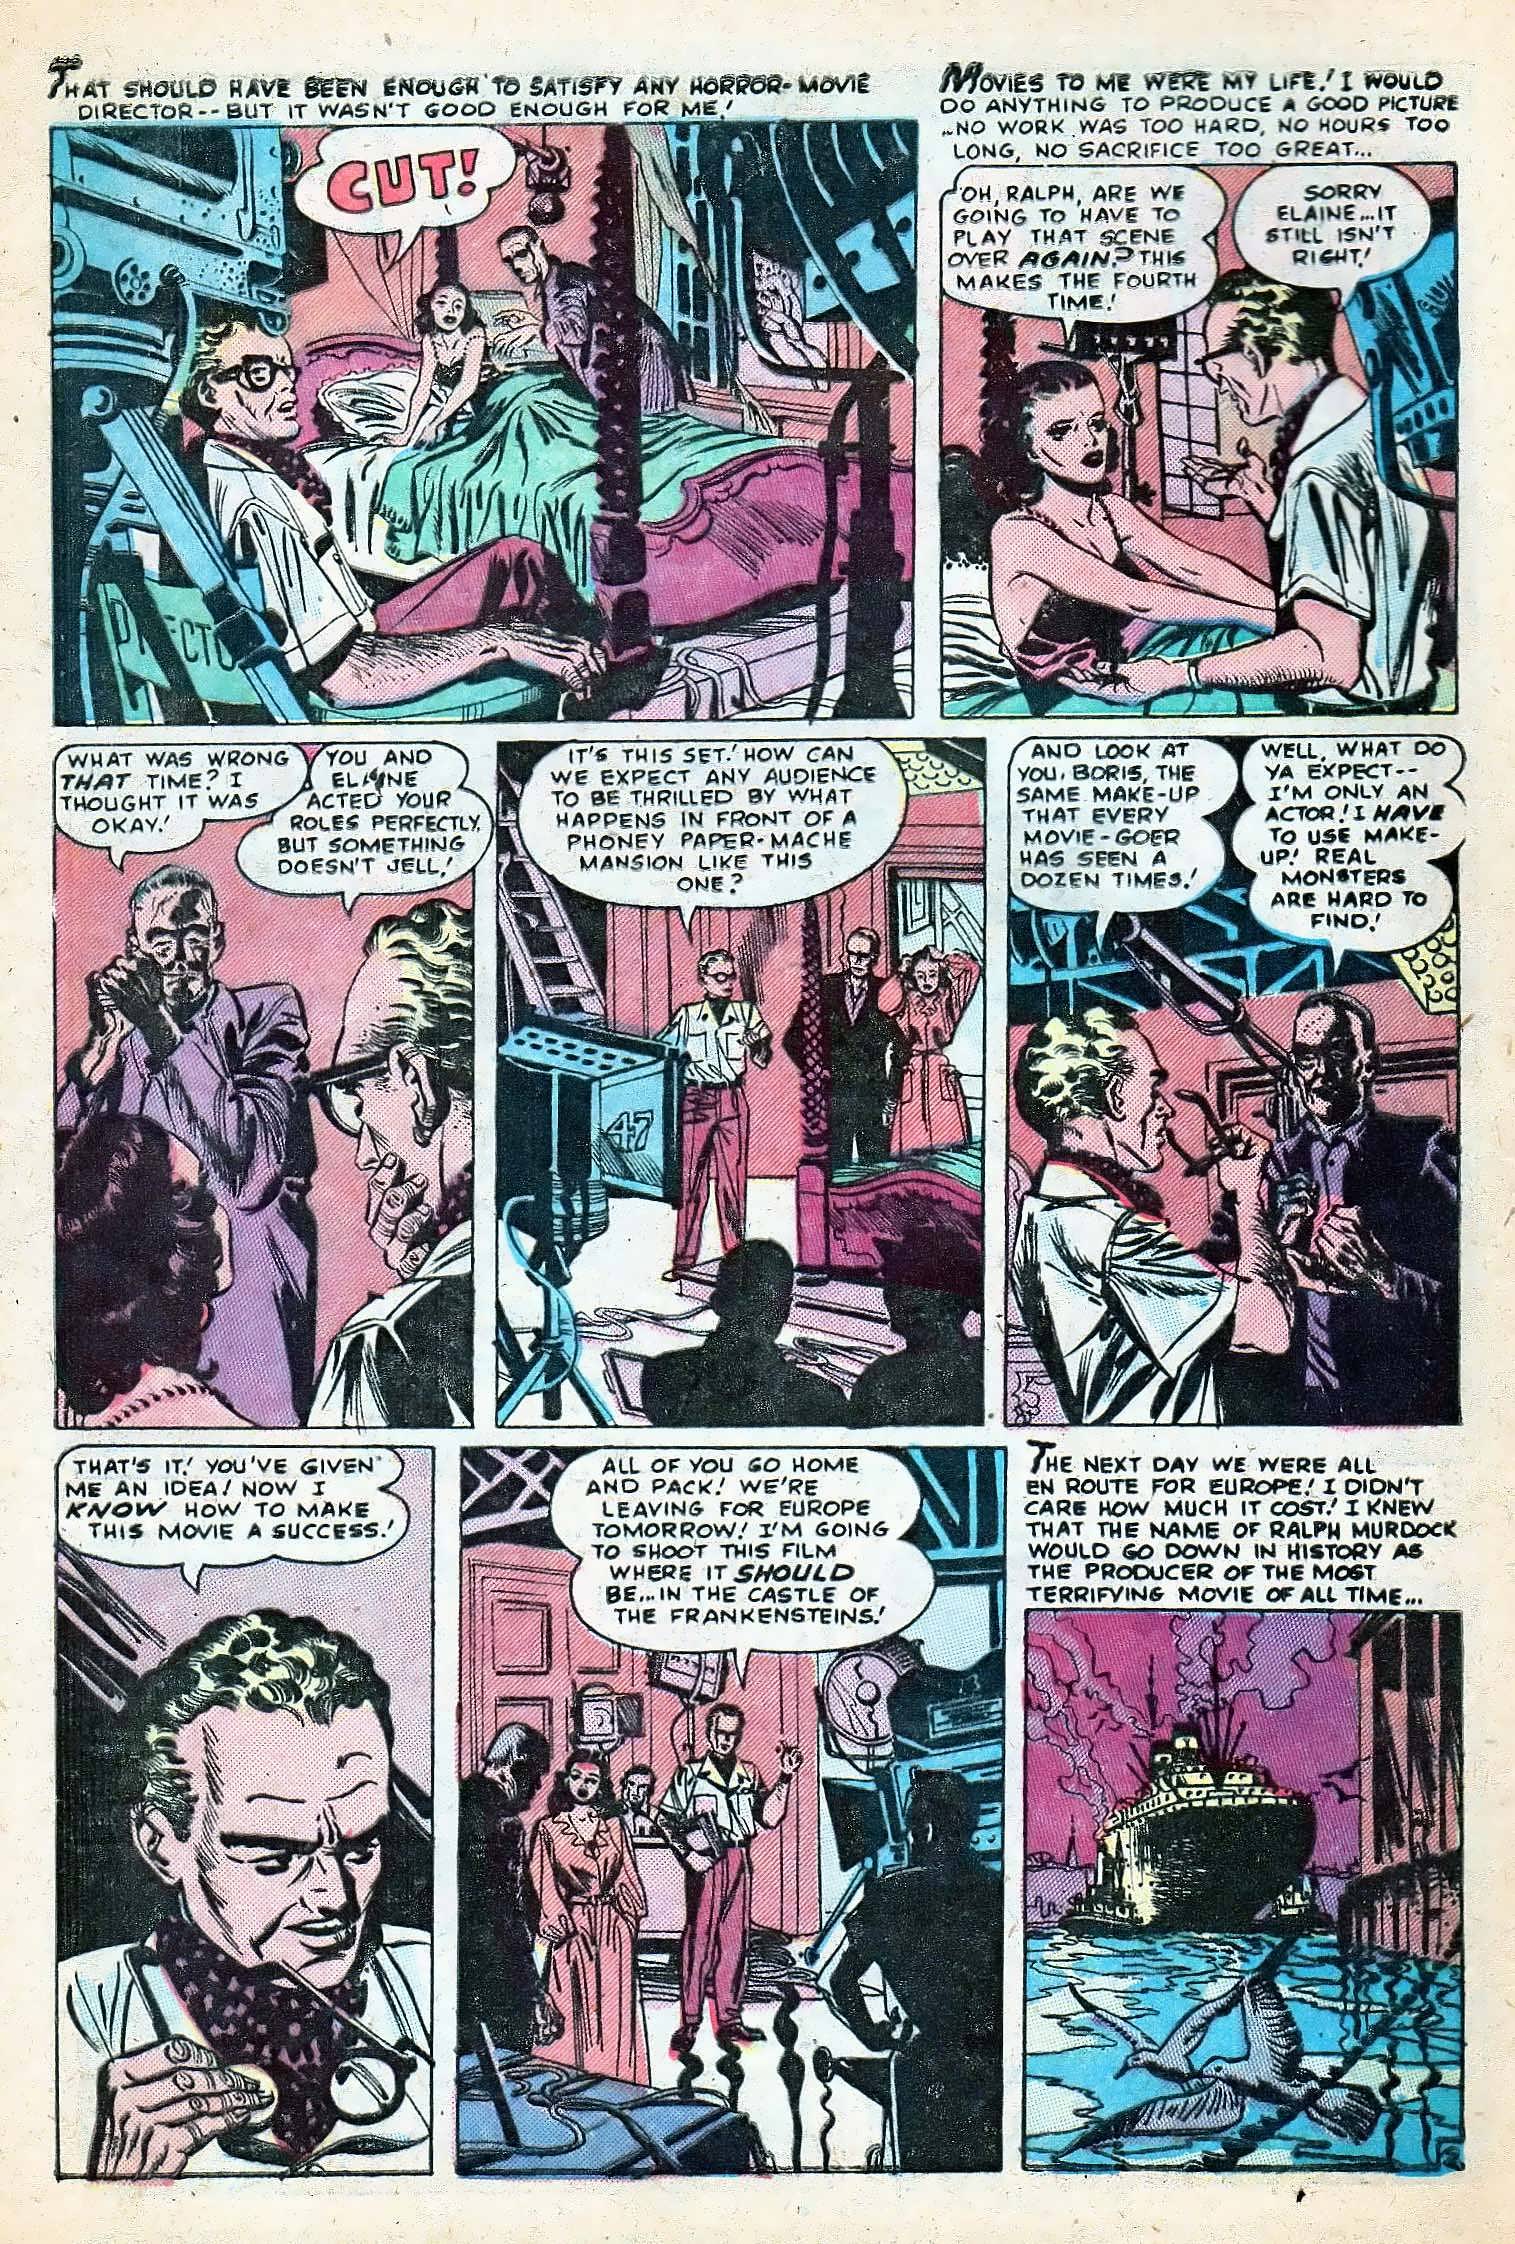 Marvel Tales (1949) 106 Page 3